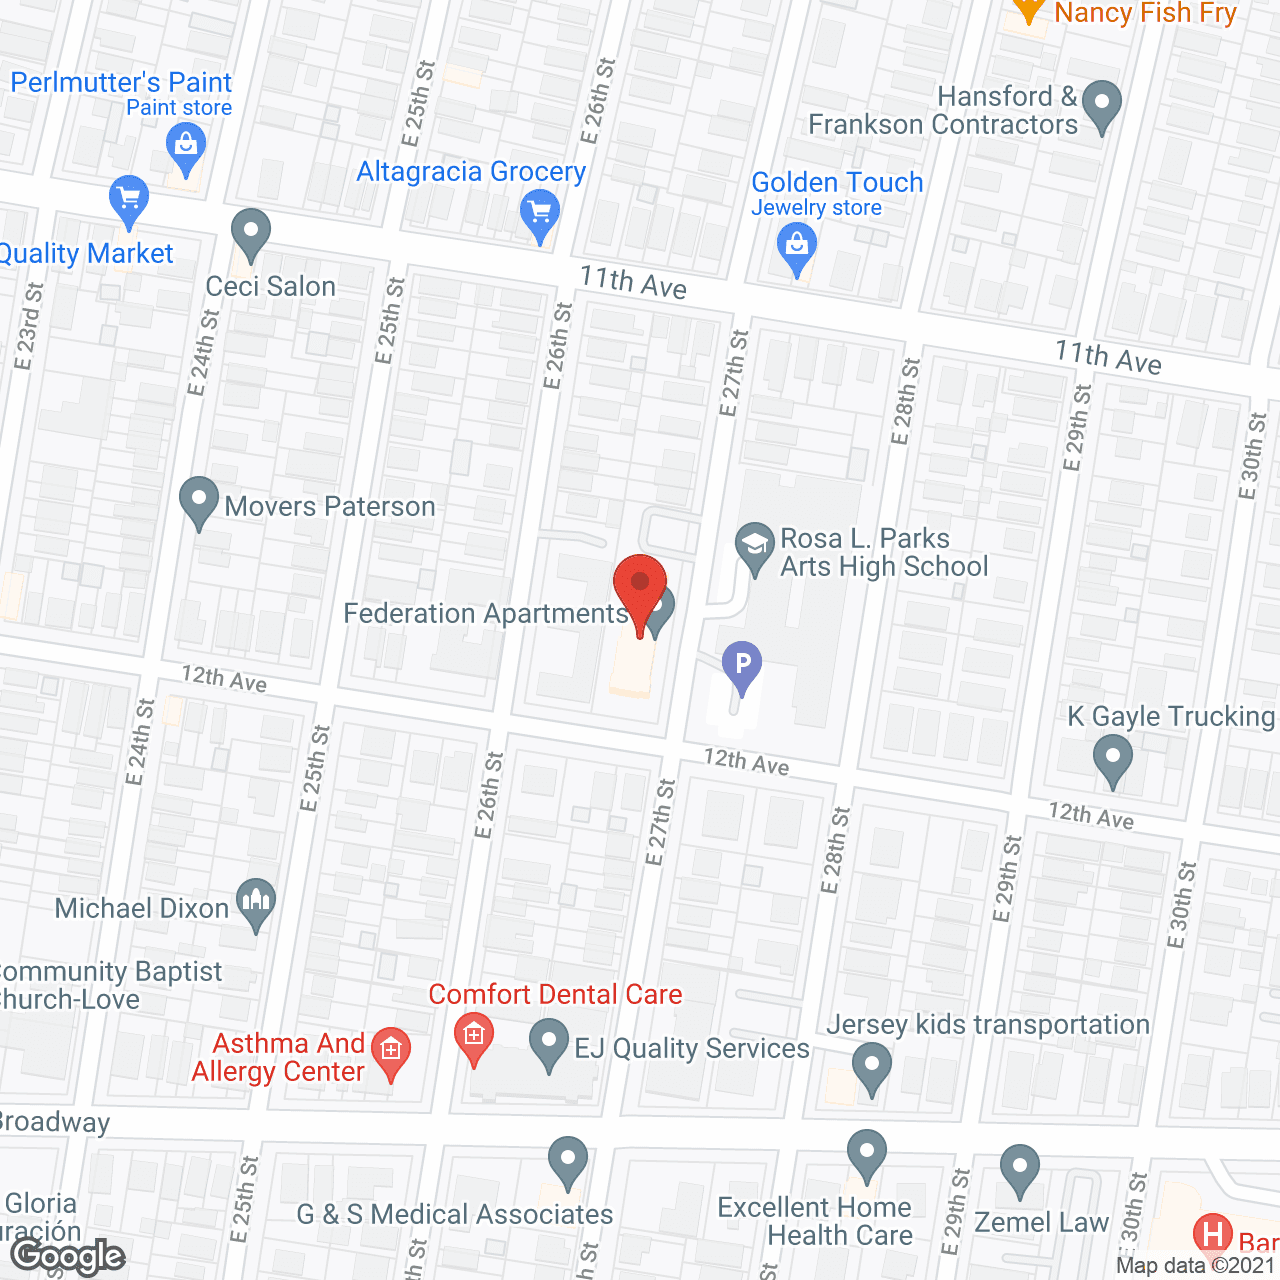 Federation Apartments in google map